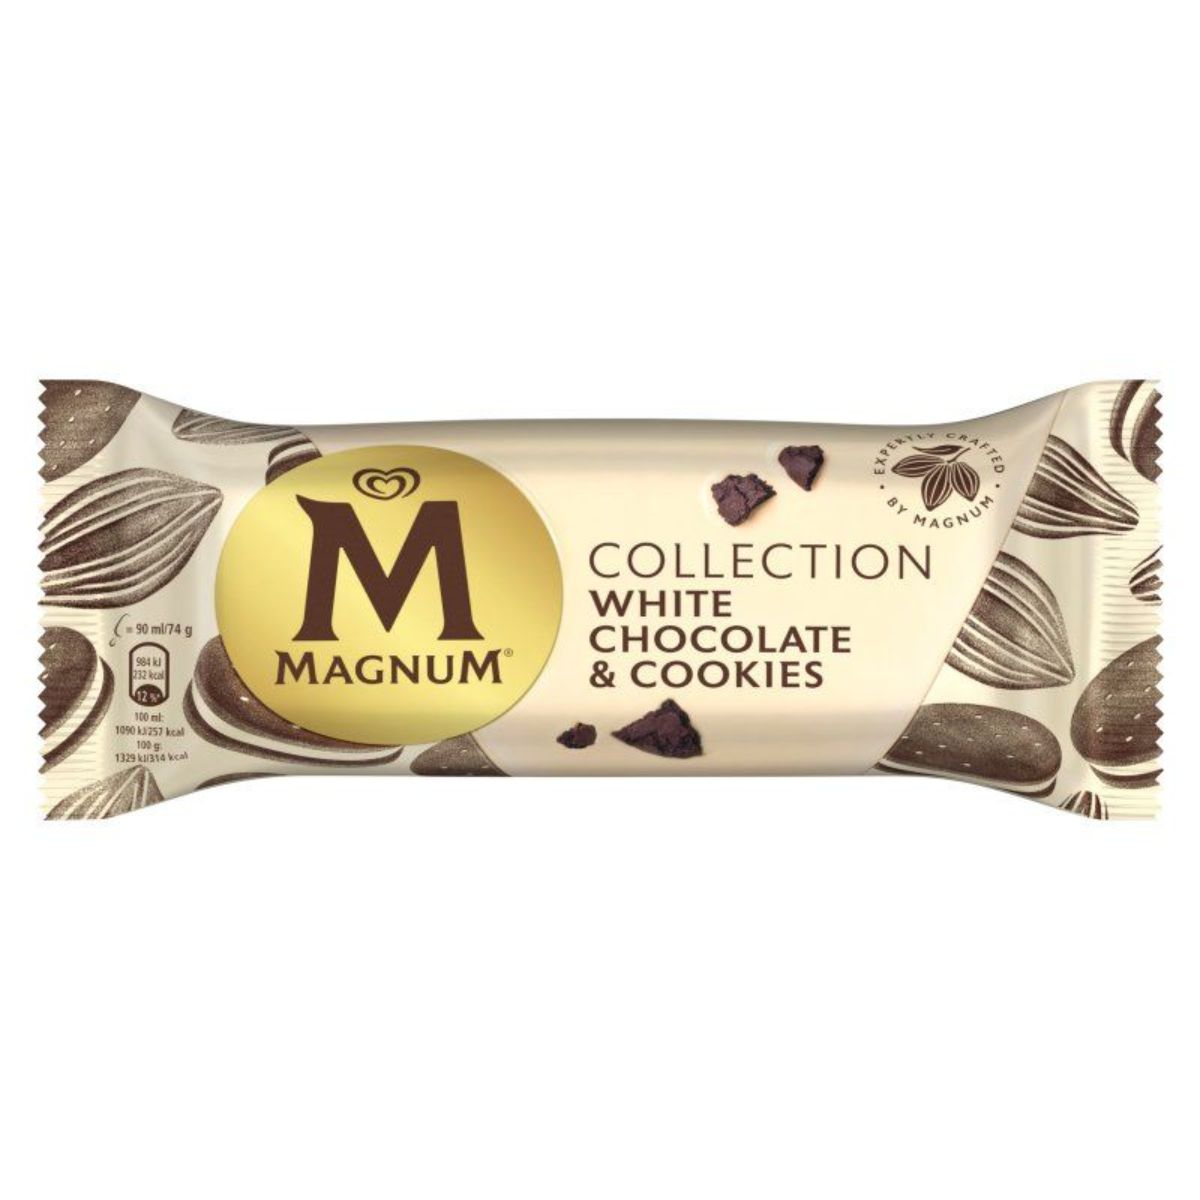 Magnum - White Chocolate & Cookies - 74g collection.